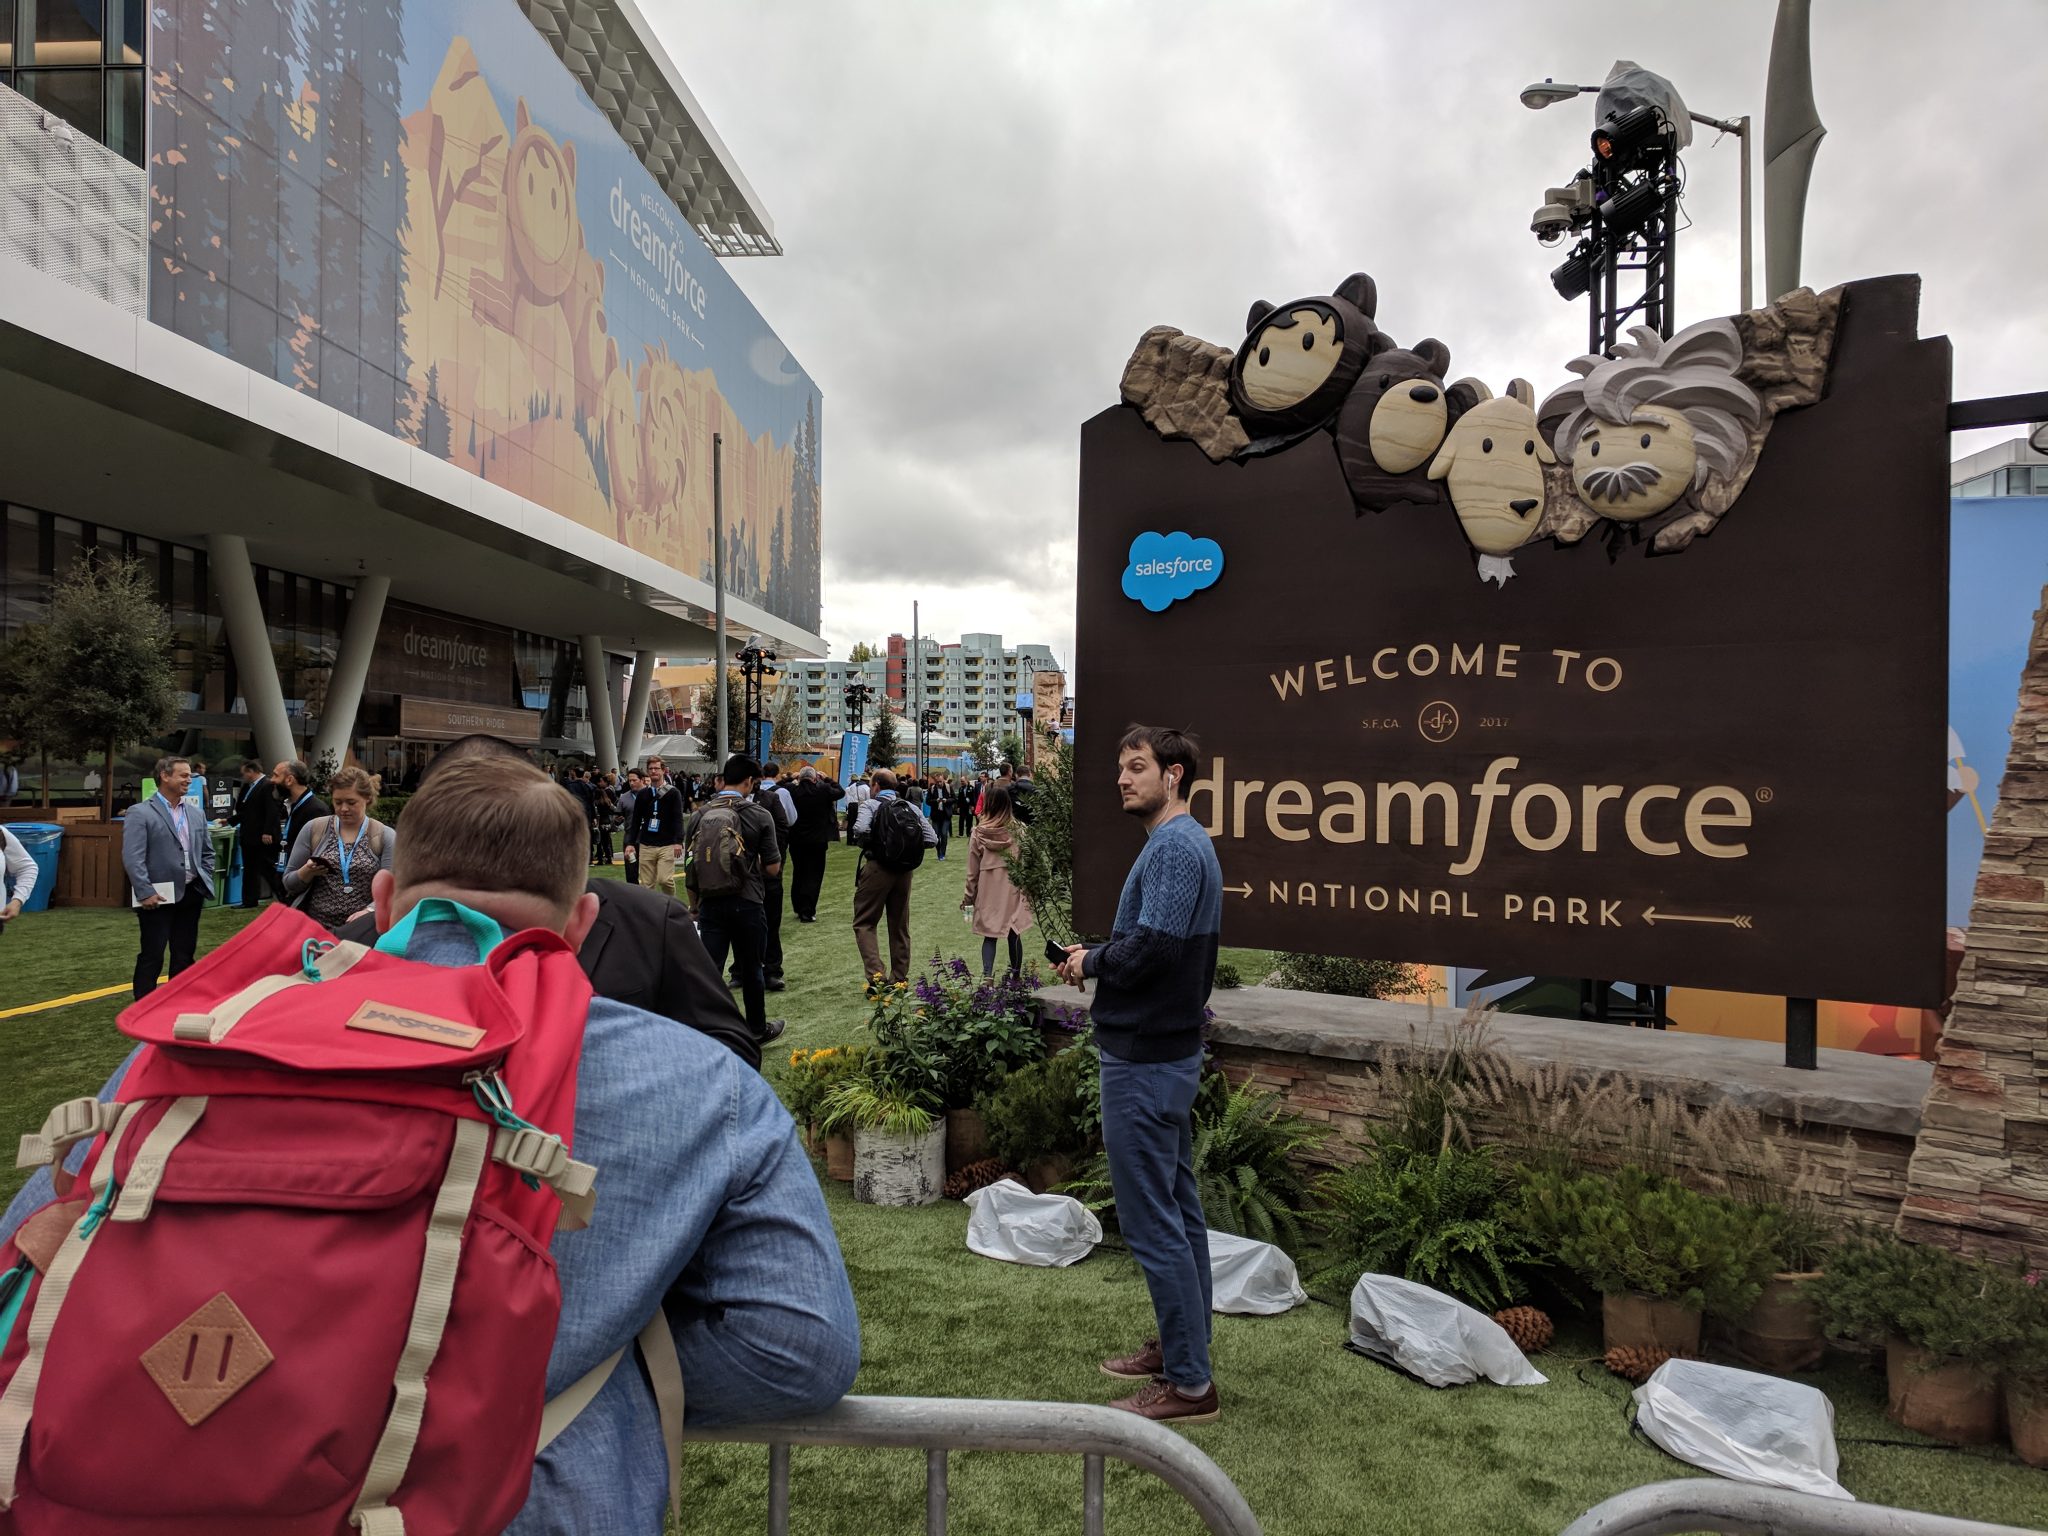 Our Favorite 5 Booths at Dreamforce '22